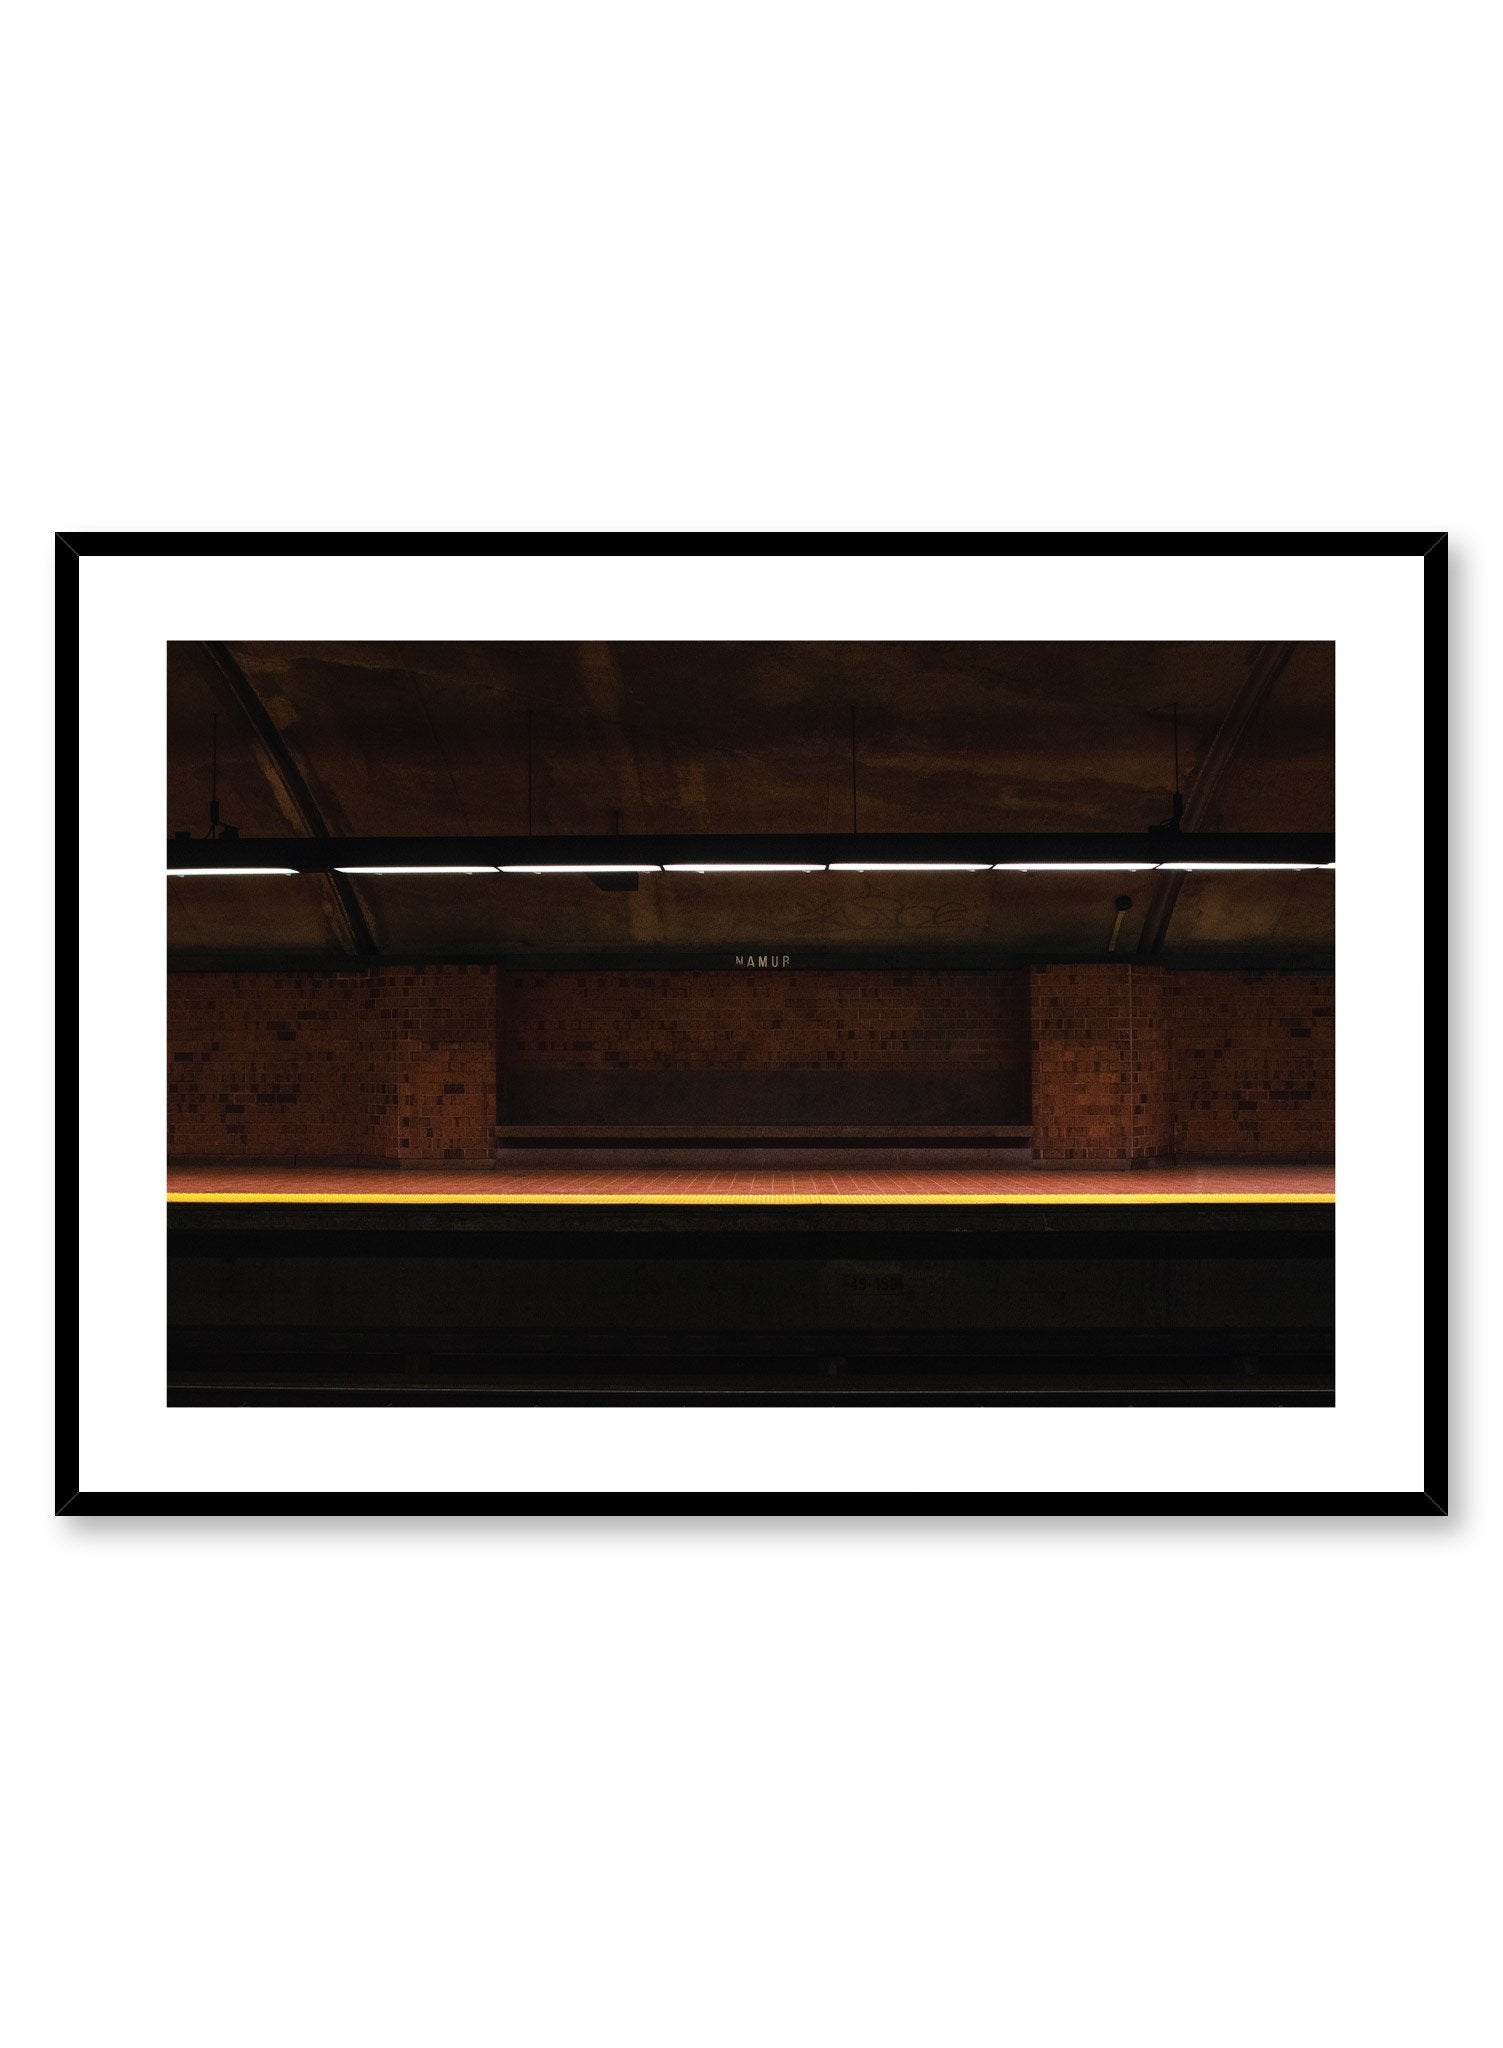 Minimalist design poster by Opposite Wall with urban street photography of Montreal Namur metro station